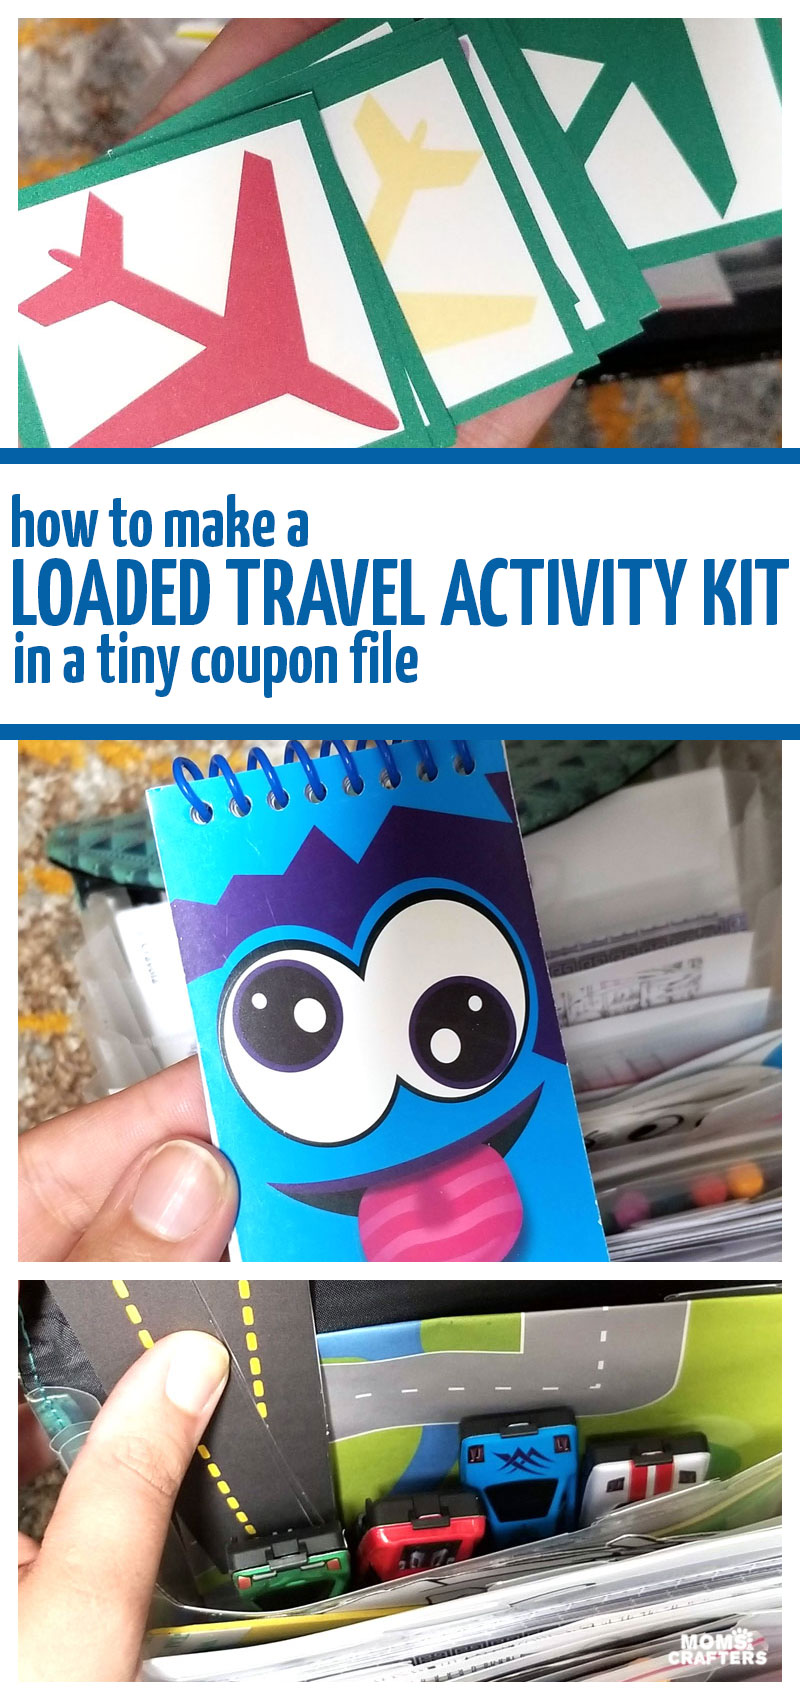 Fun, Simple Travel Activity Kit for Kids - Artsy Momma